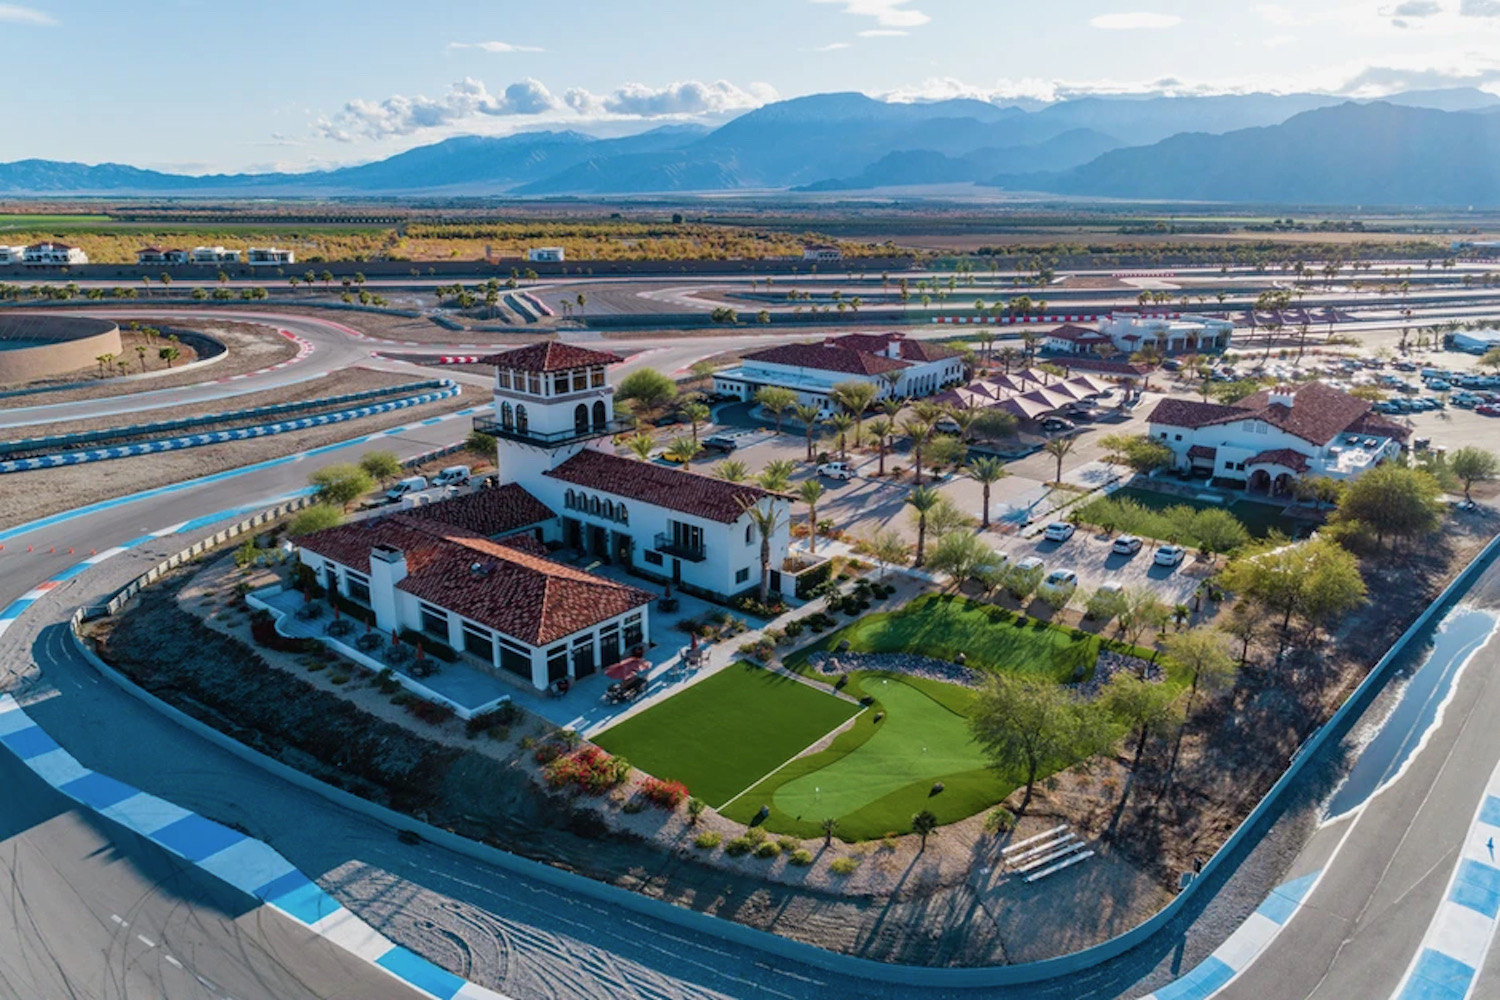 Meet The Thermal Club: A Million-Dollar Country Club For Car Enthusiasts